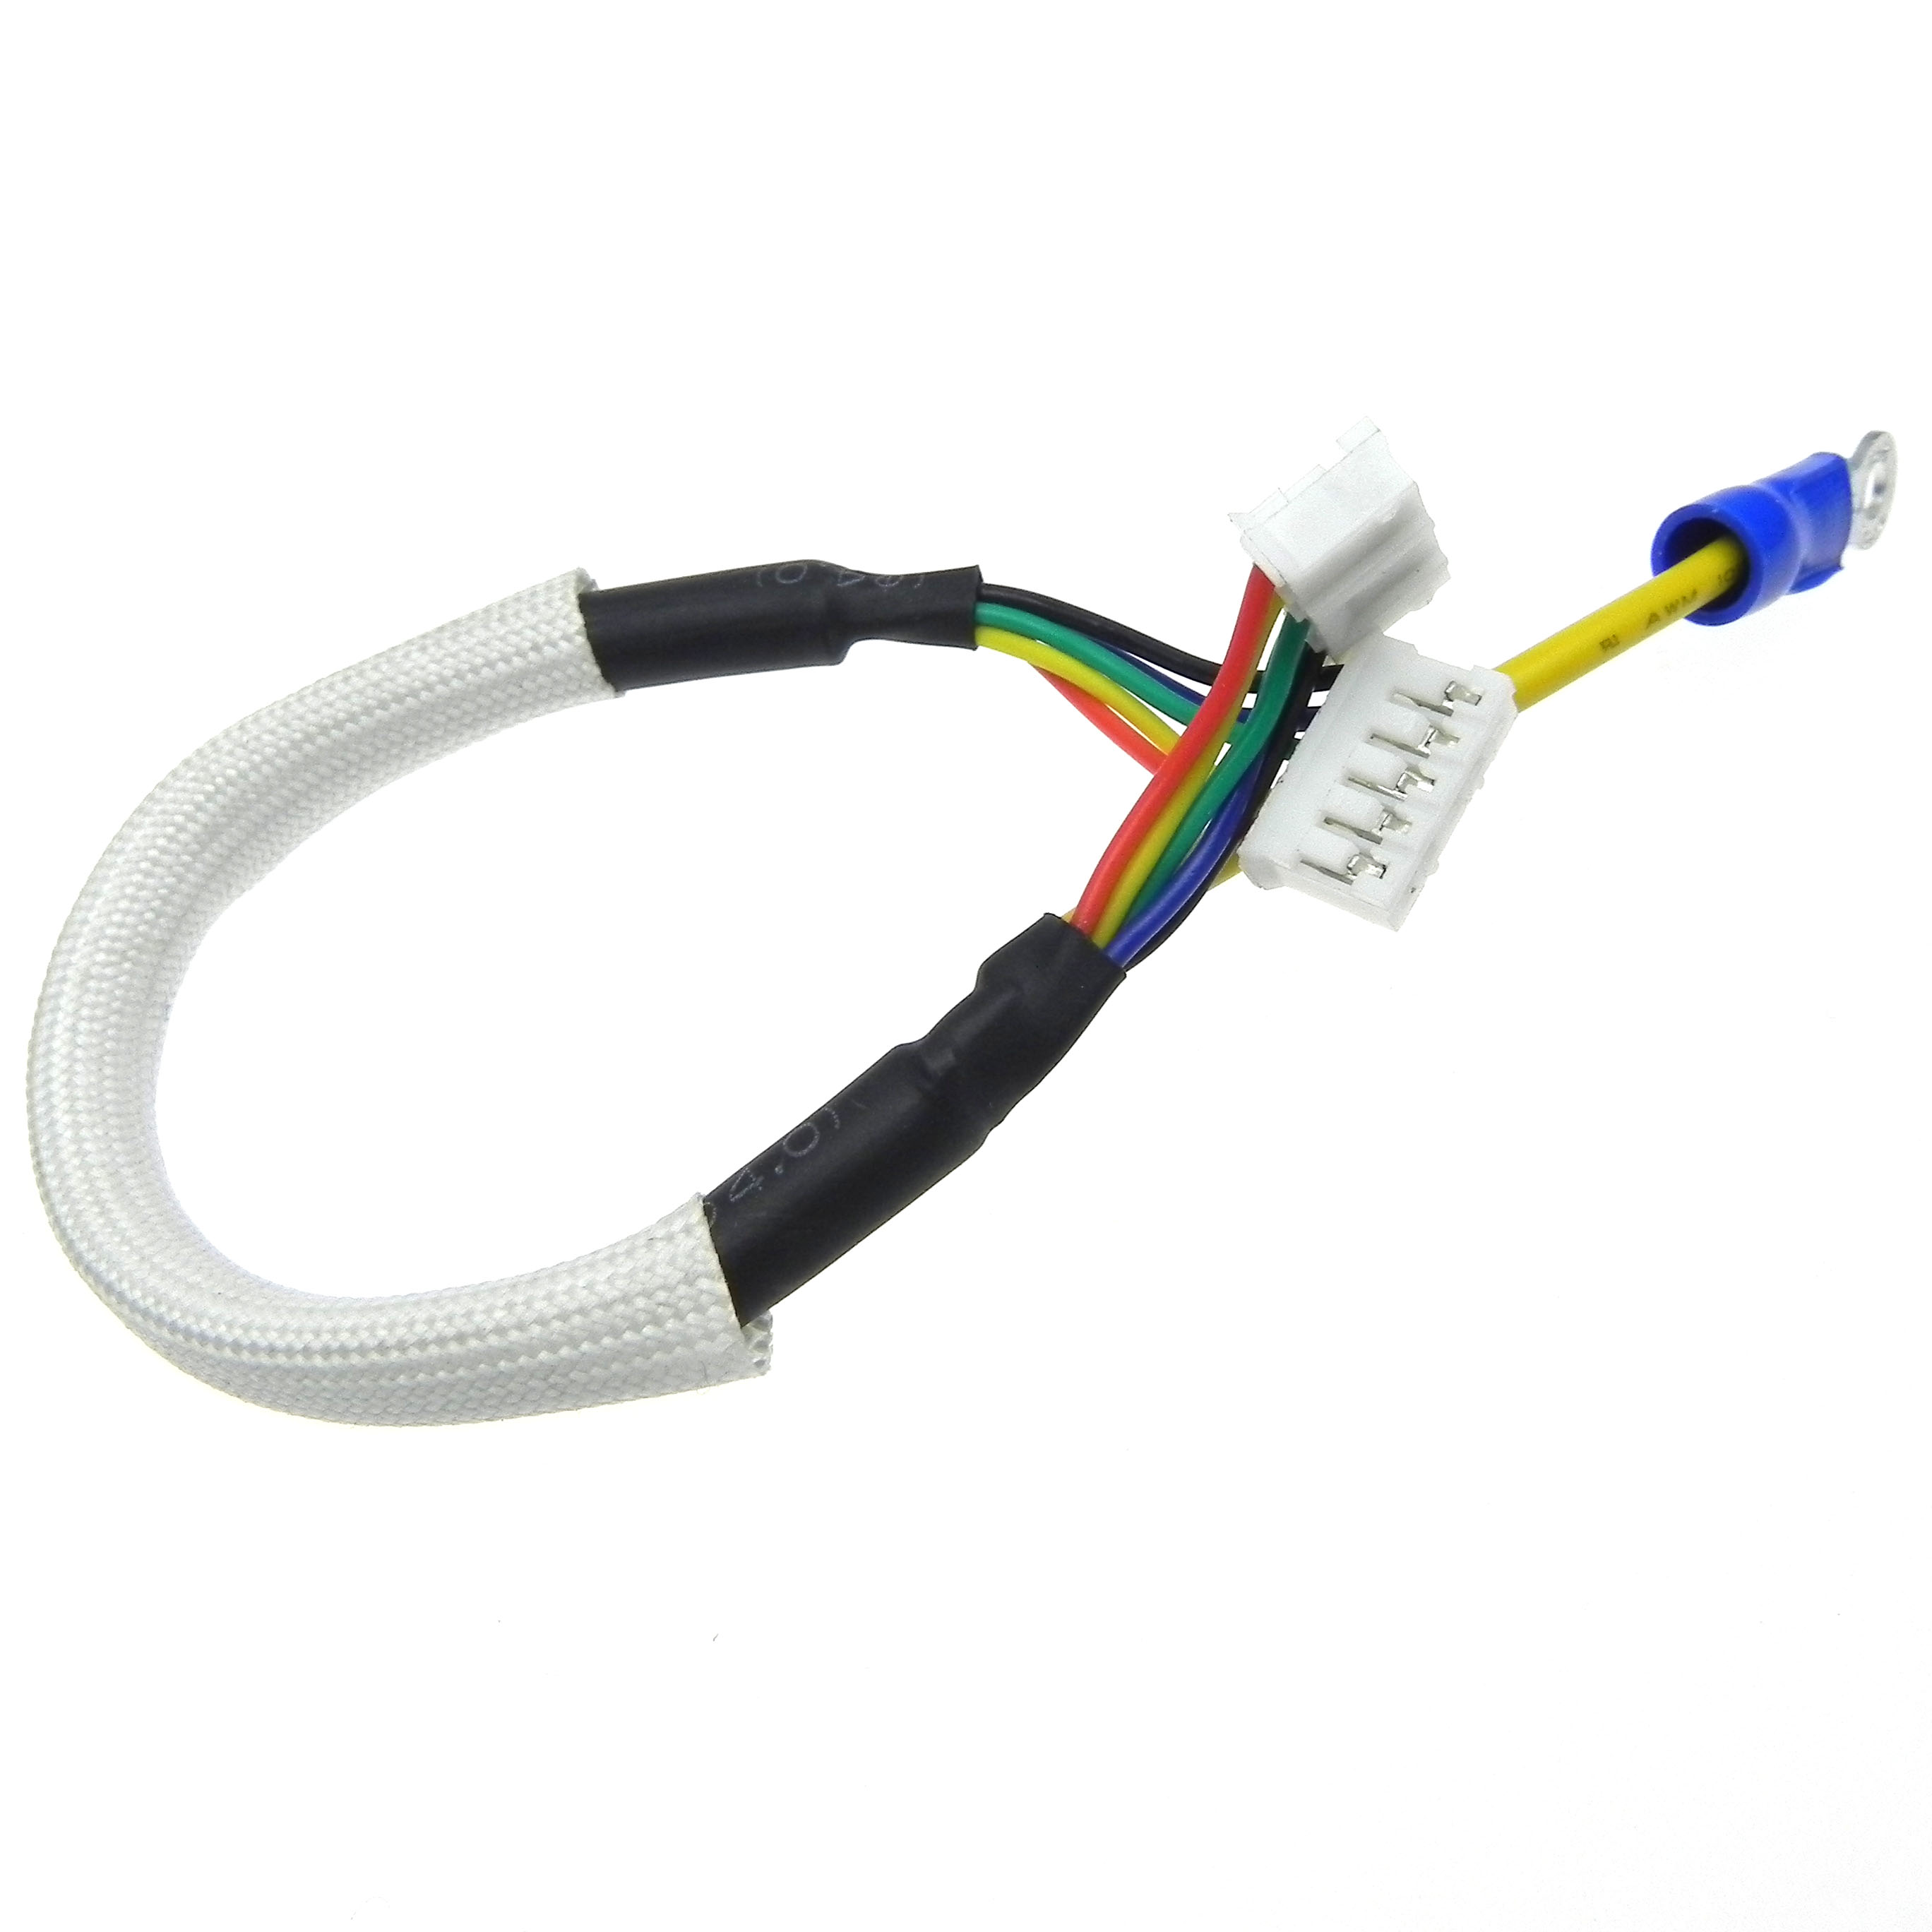 Both end PH2.0 5pin power cable